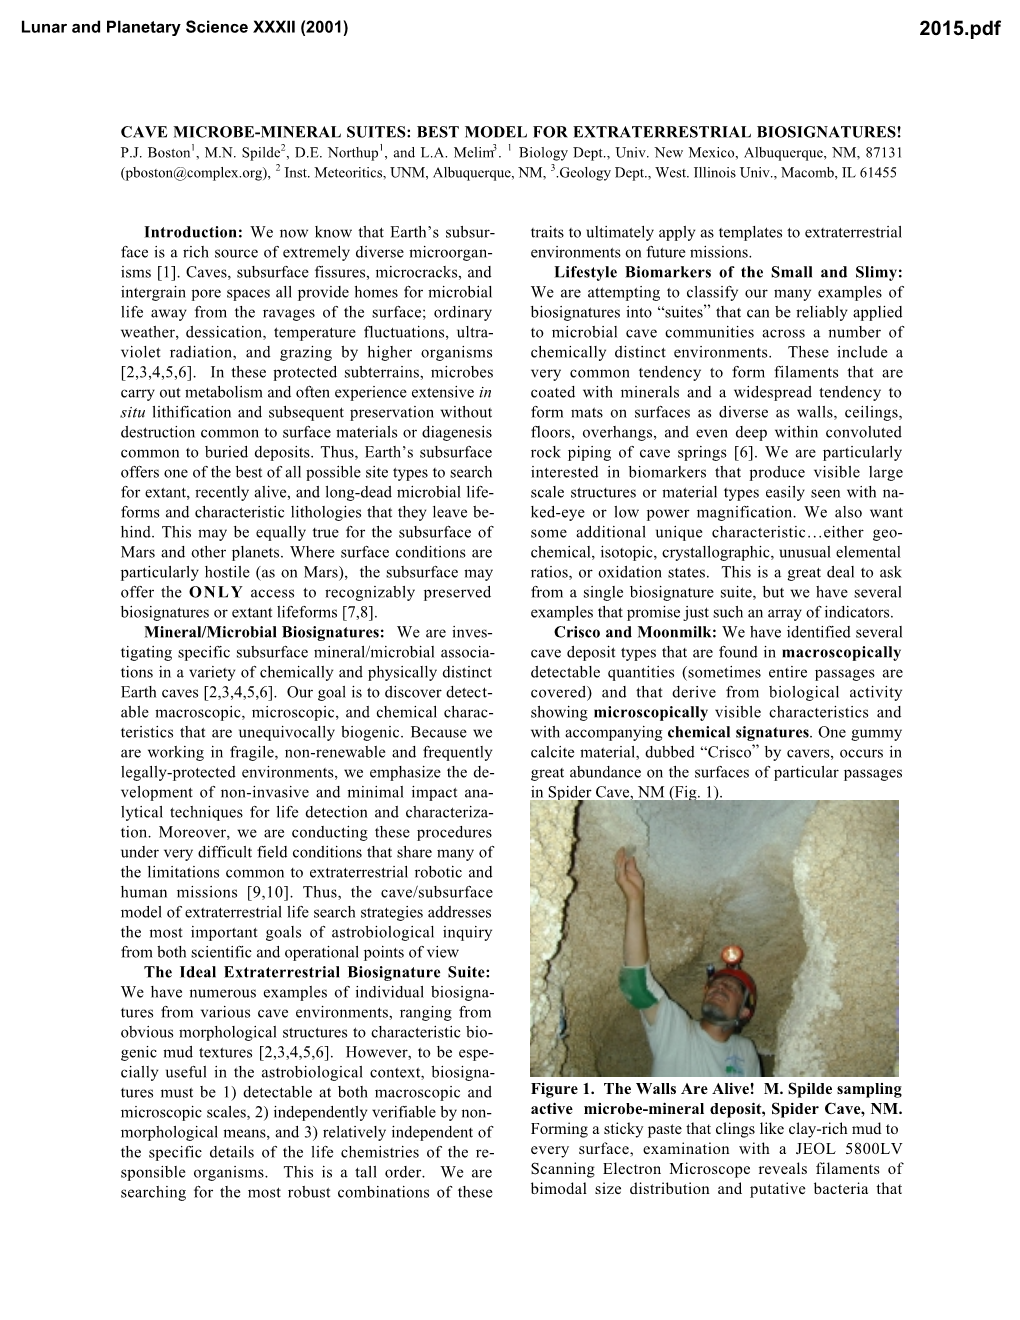 Cave Microbe-Mineral Suites: Best Model for Extraterrestrial Biosignatures! P.J